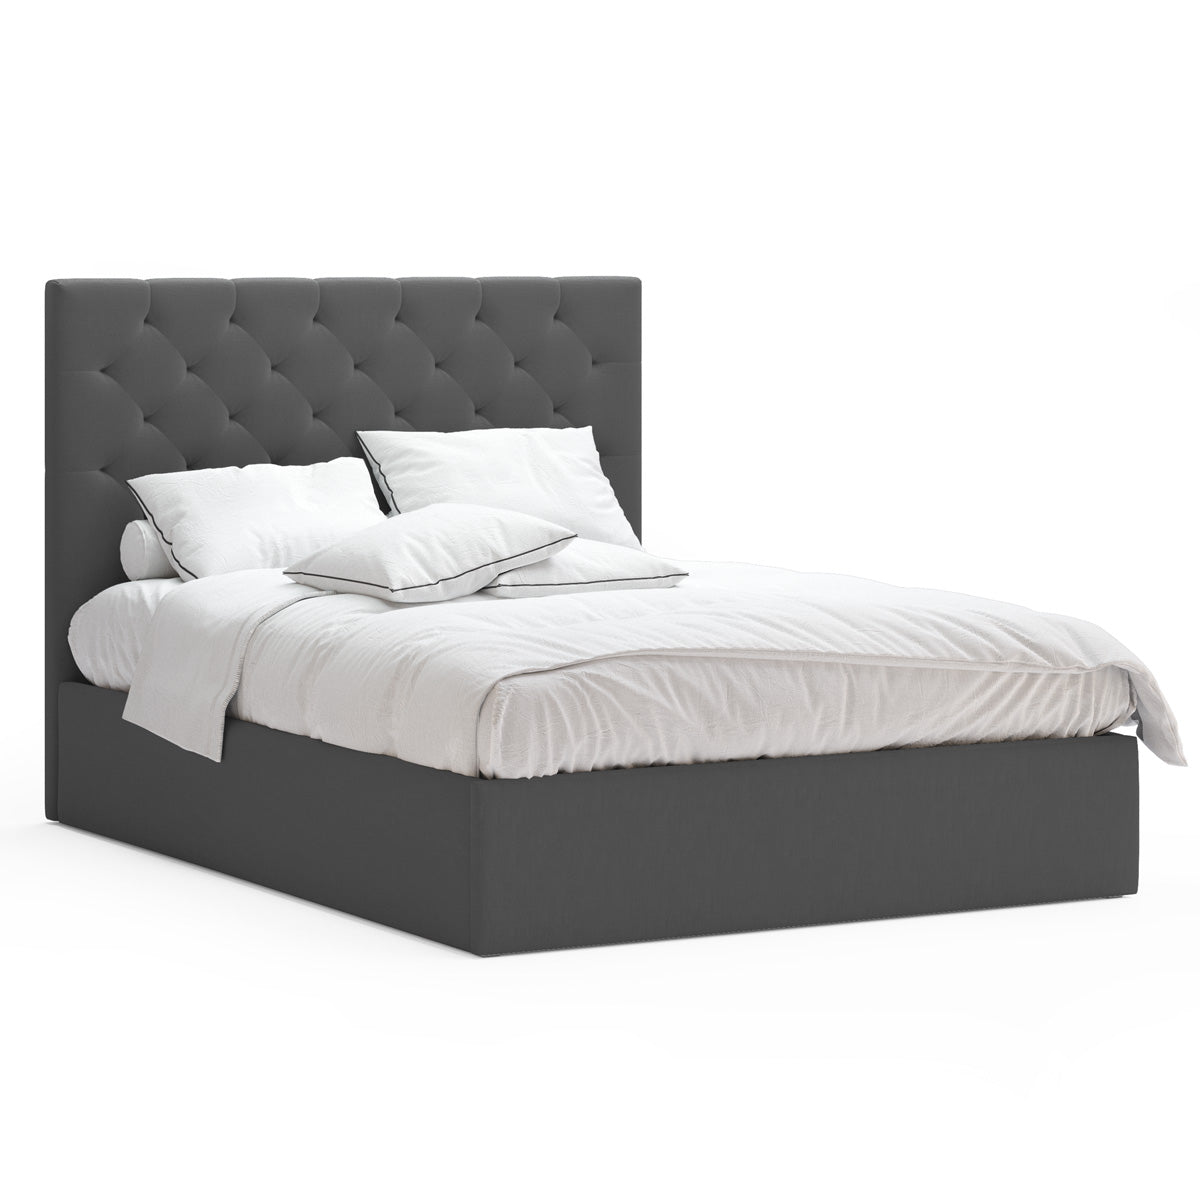 Fenwick Gas Lift Storage Bed Frame (Charcoal Fabric)